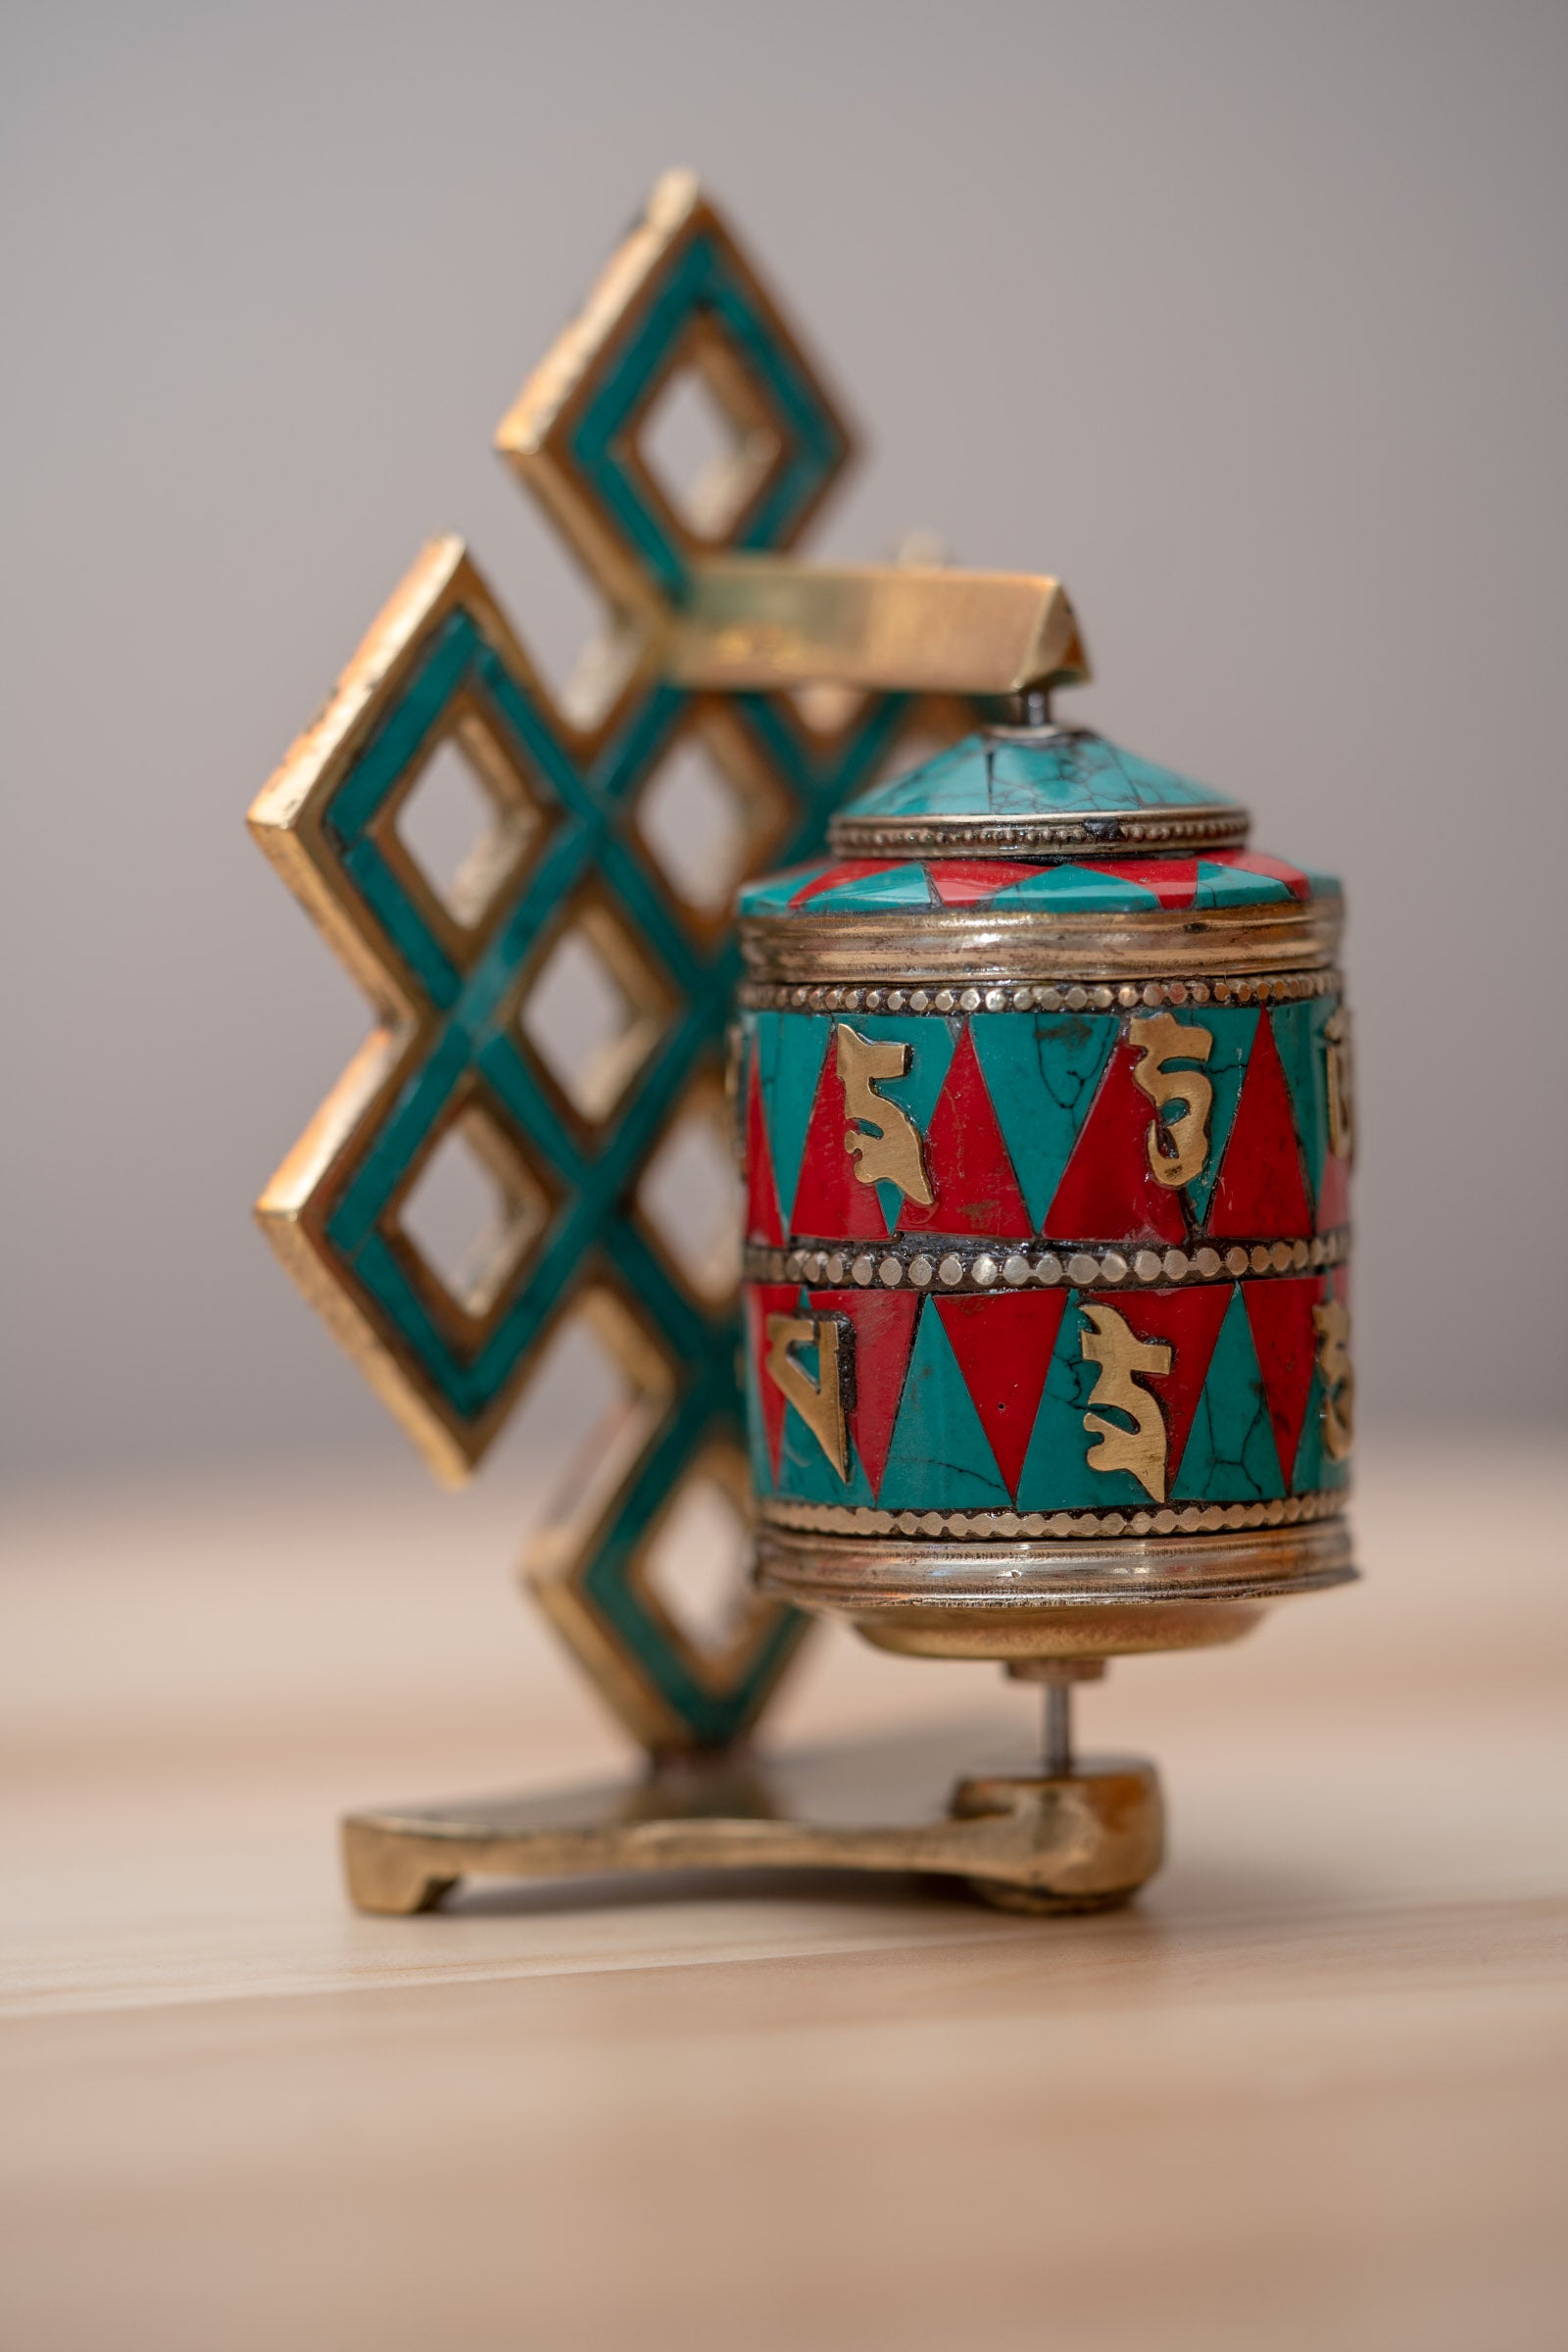 Prayer wheel with endless knot symbol for spiritual practice .